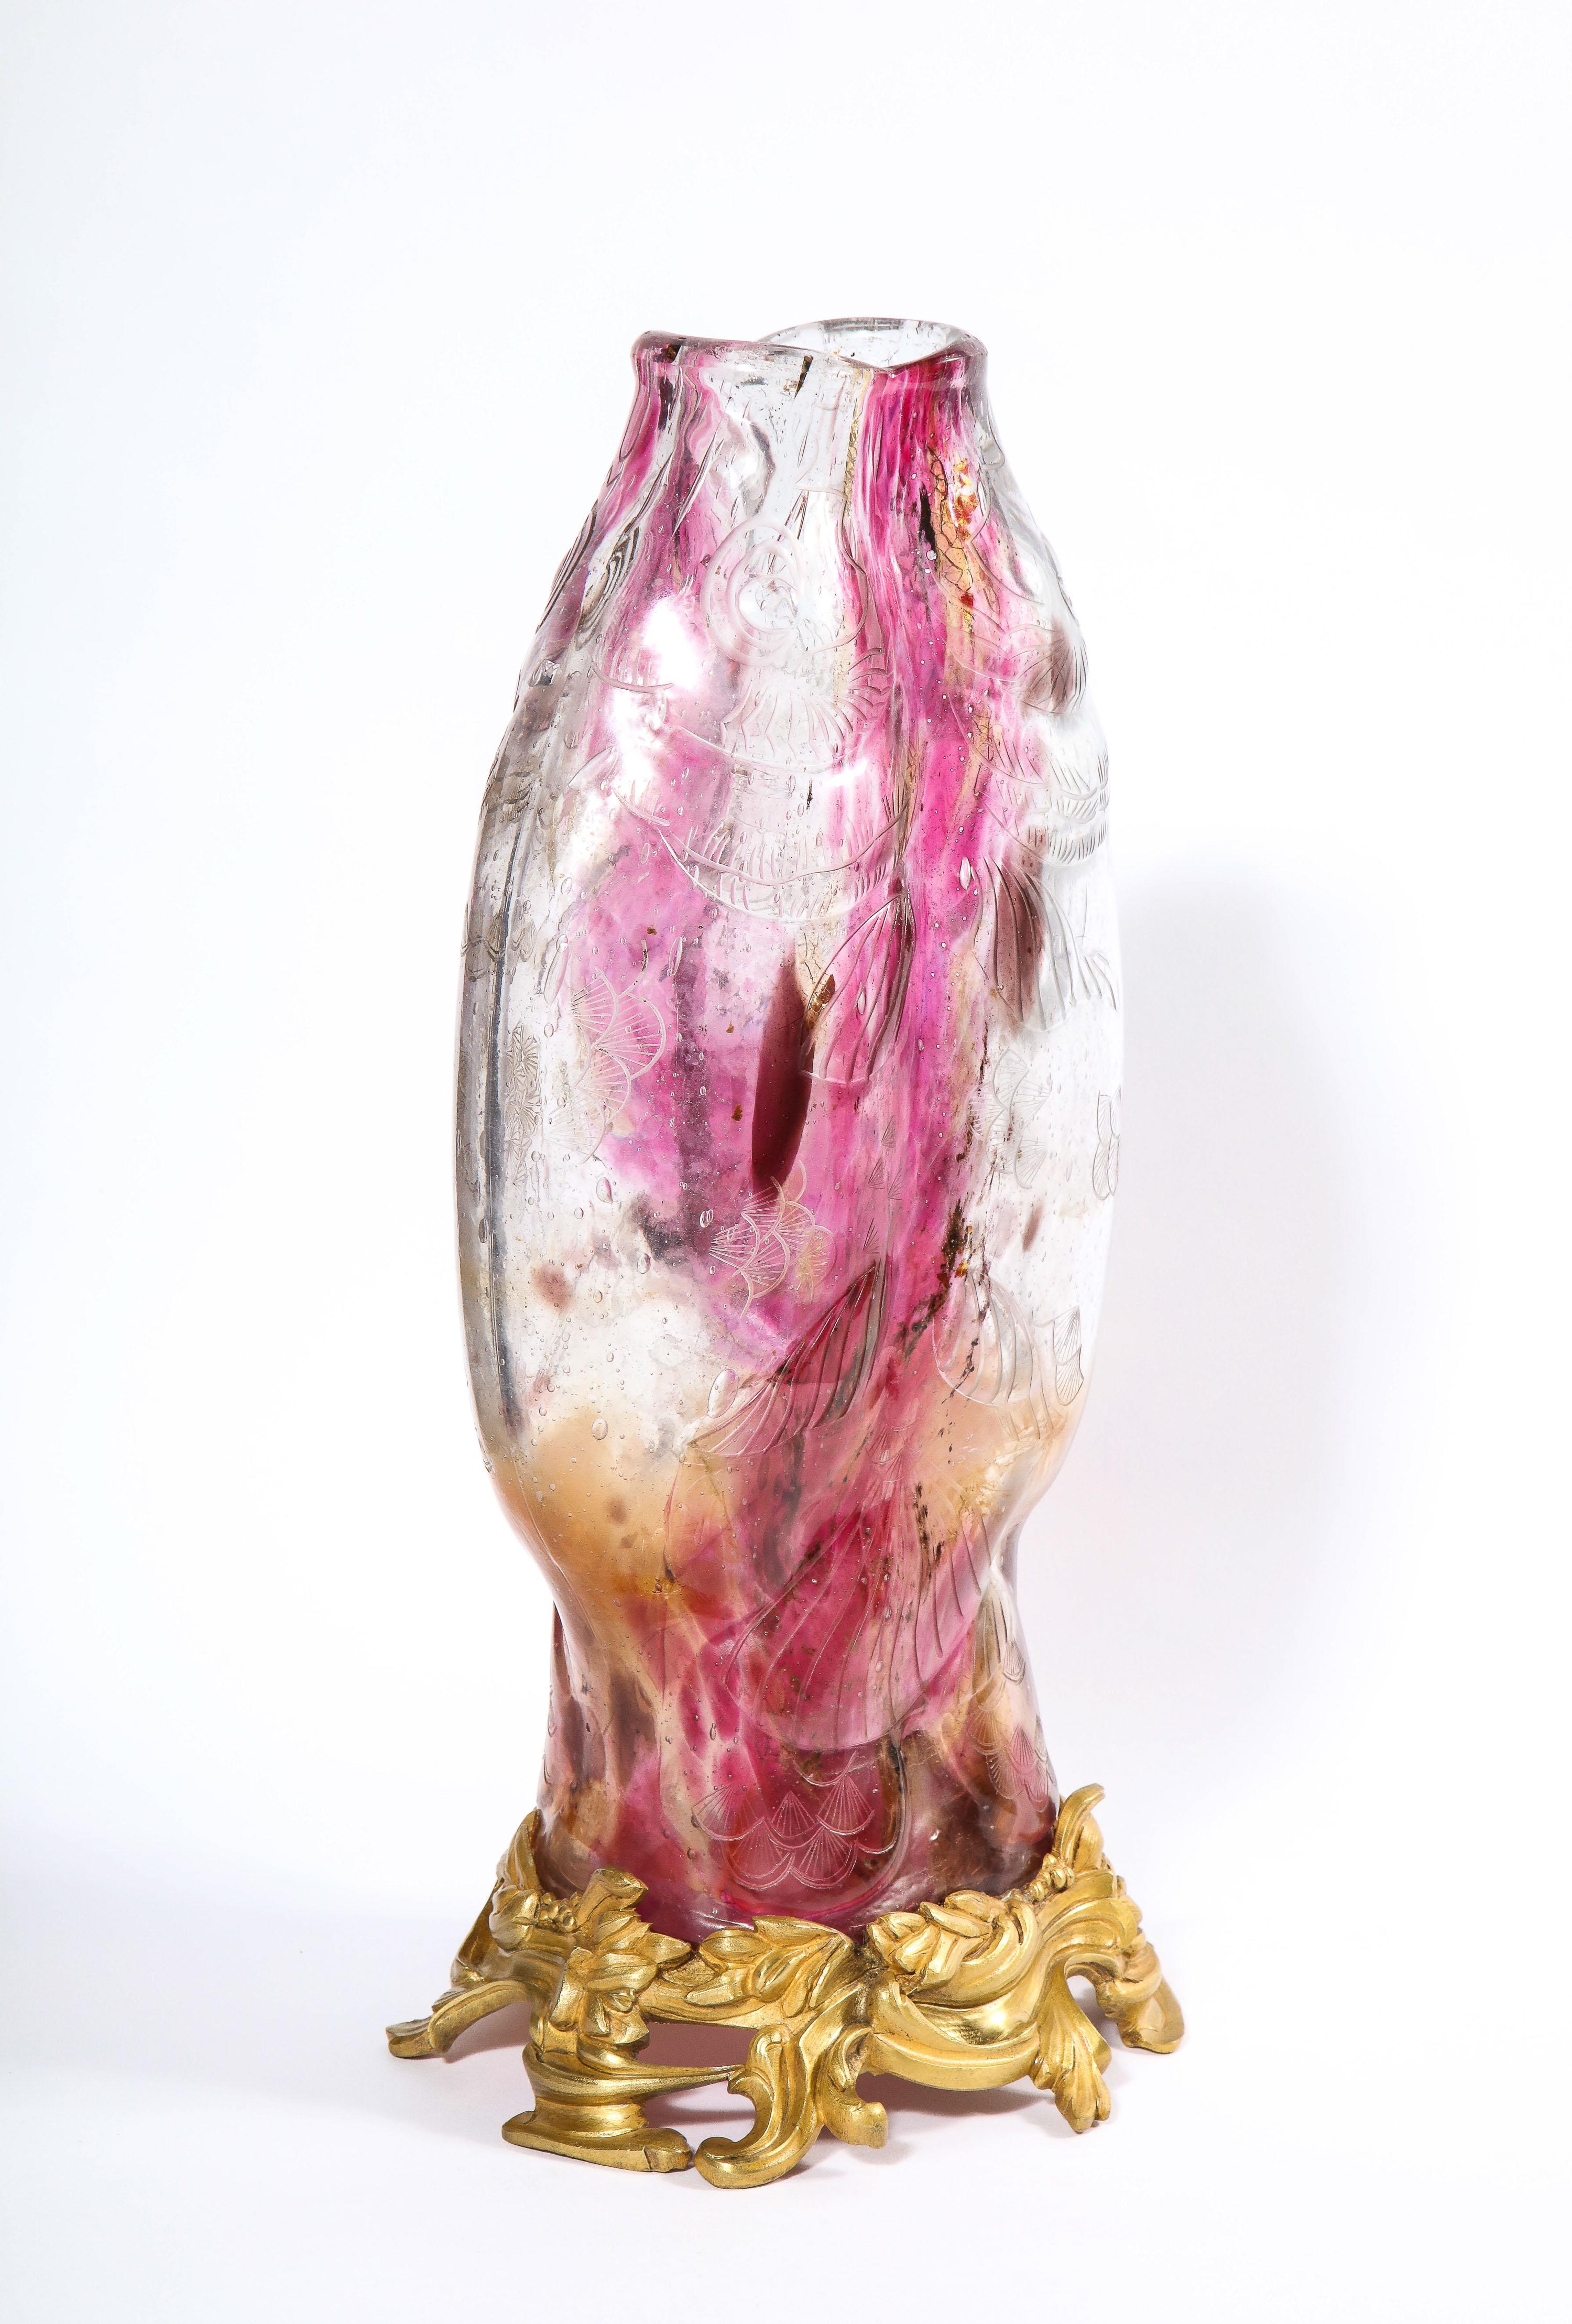 Emile Galle, A Rare & Important Ormolu-Mounted Double Carp Fish Pink-Glass Vase For Sale 4